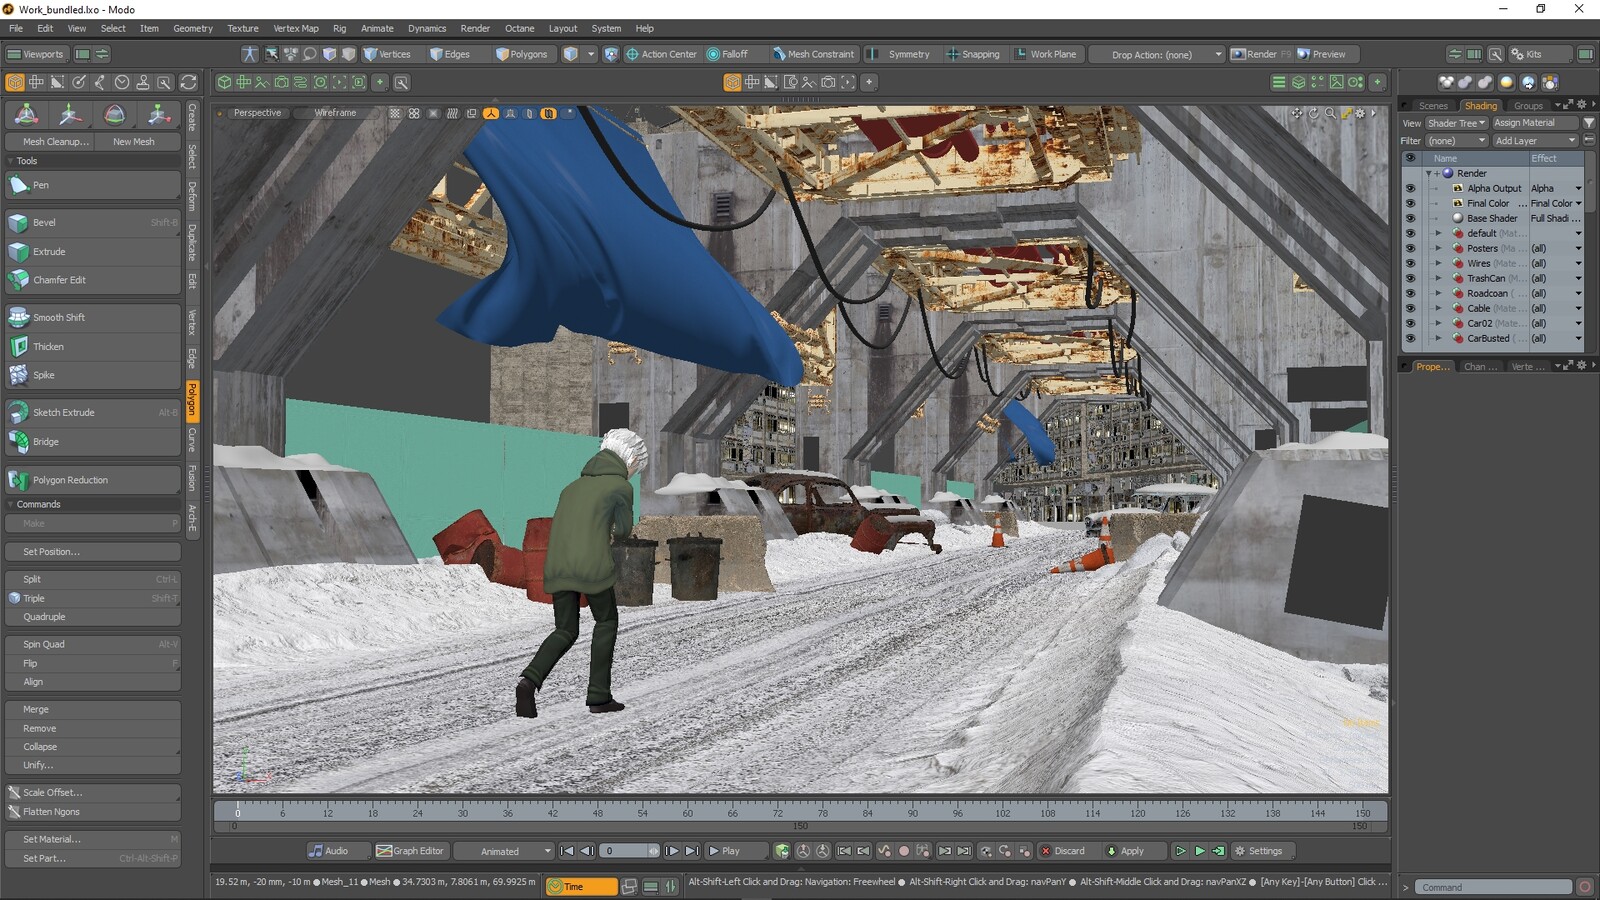 Here's what it looked like in Modo